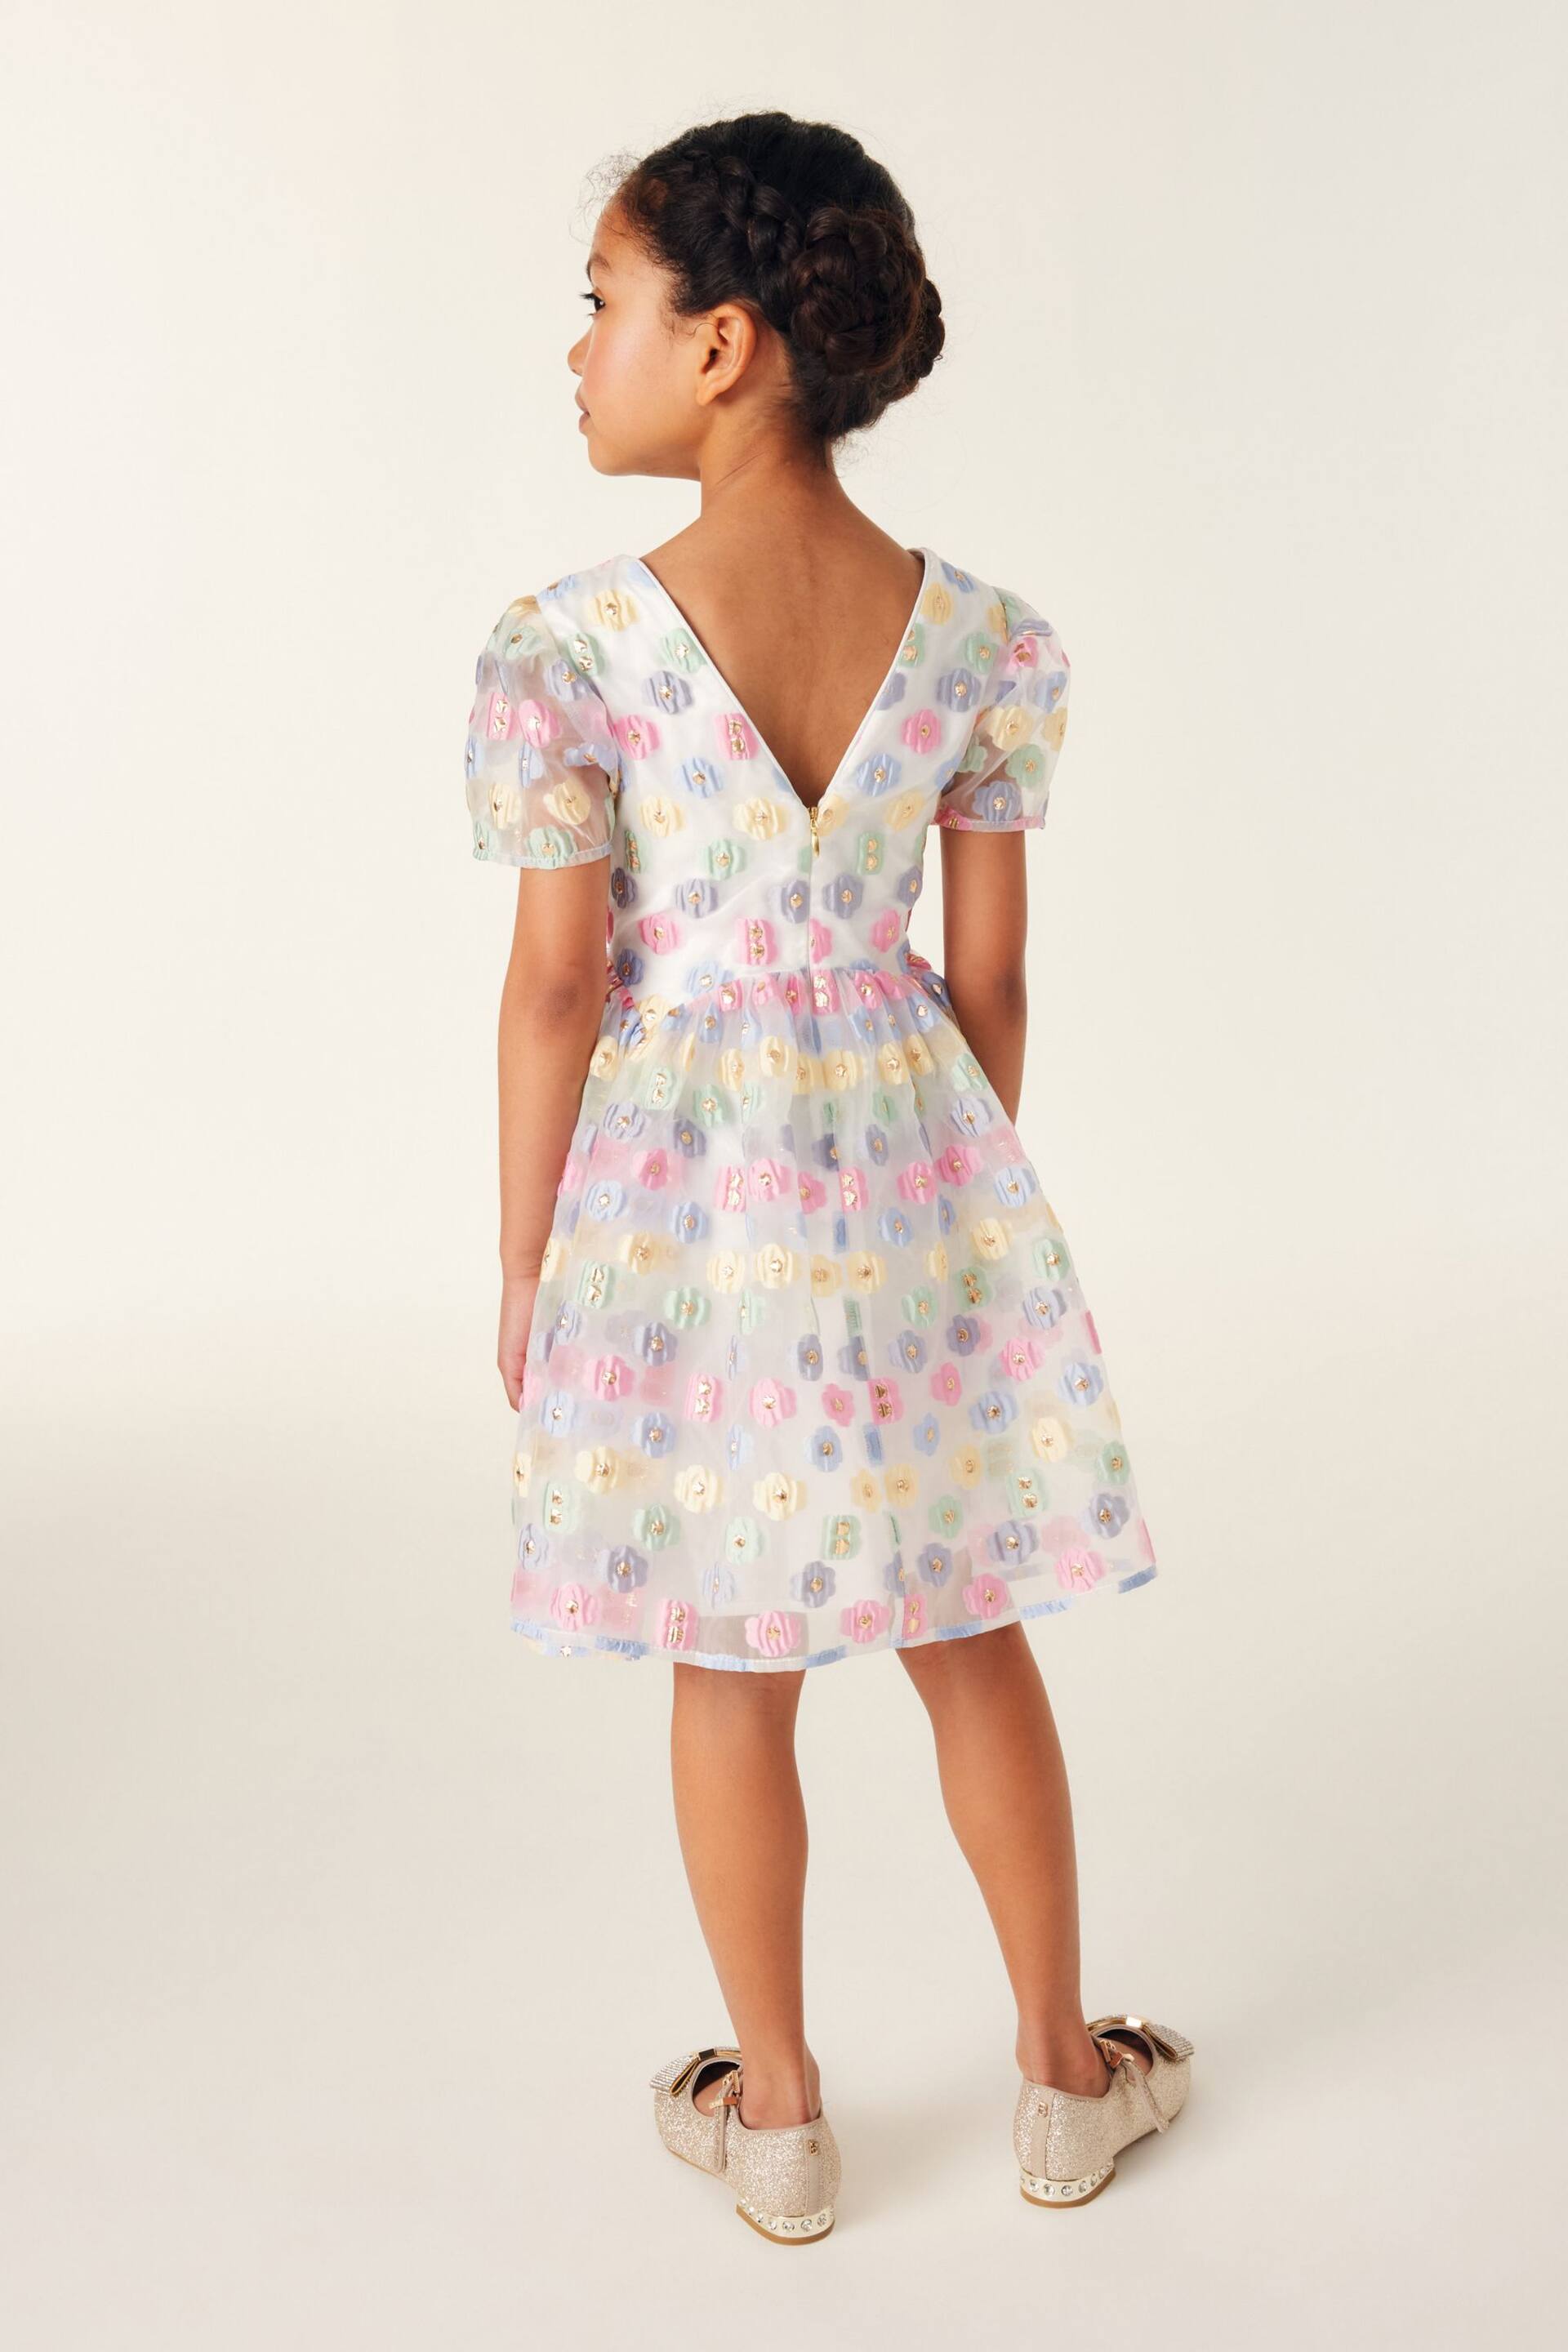 Baker by Ted Baker Multicolour Organza Dress - Image 3 of 8